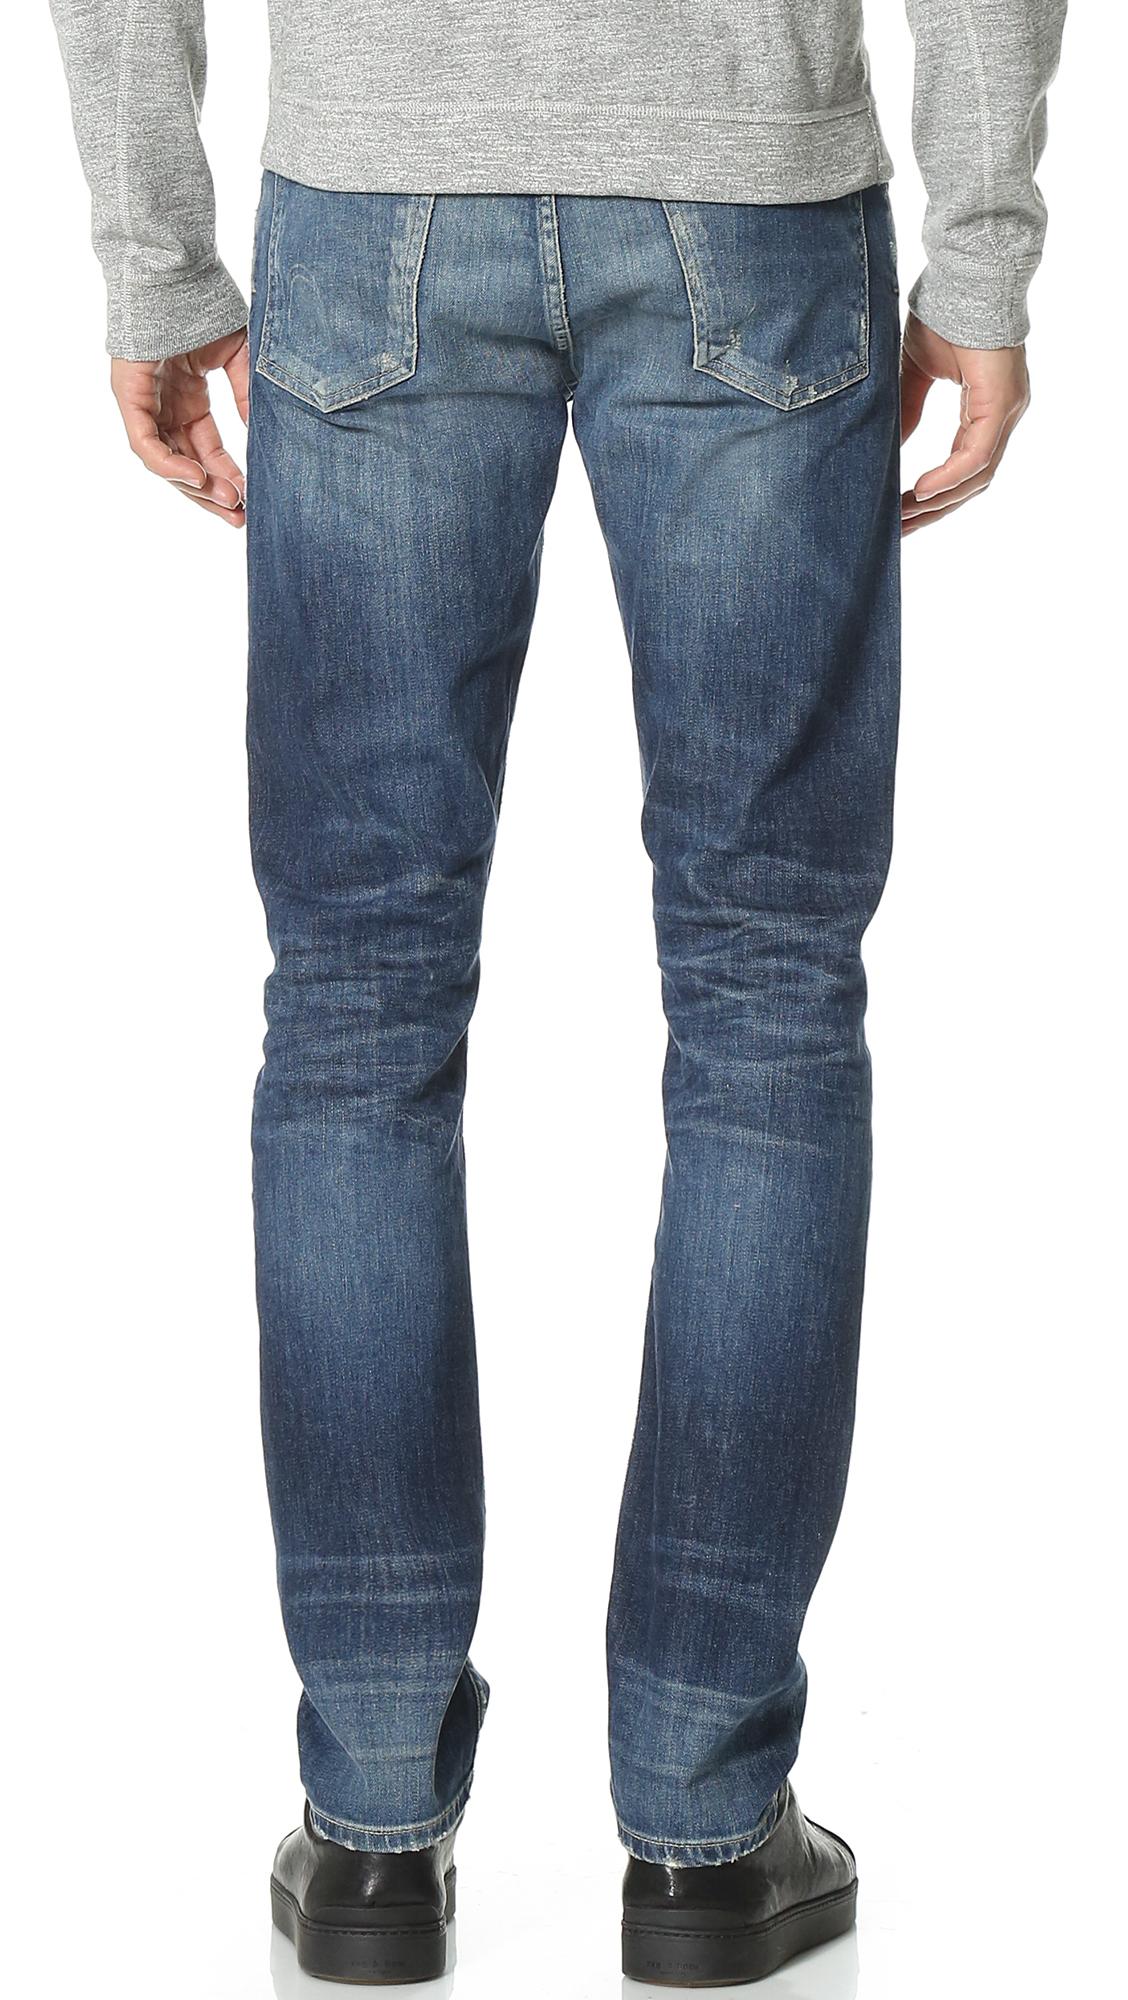 Lyst - Citizens Of Humanity Bowery Pure Slim Jeans in Blue for Men